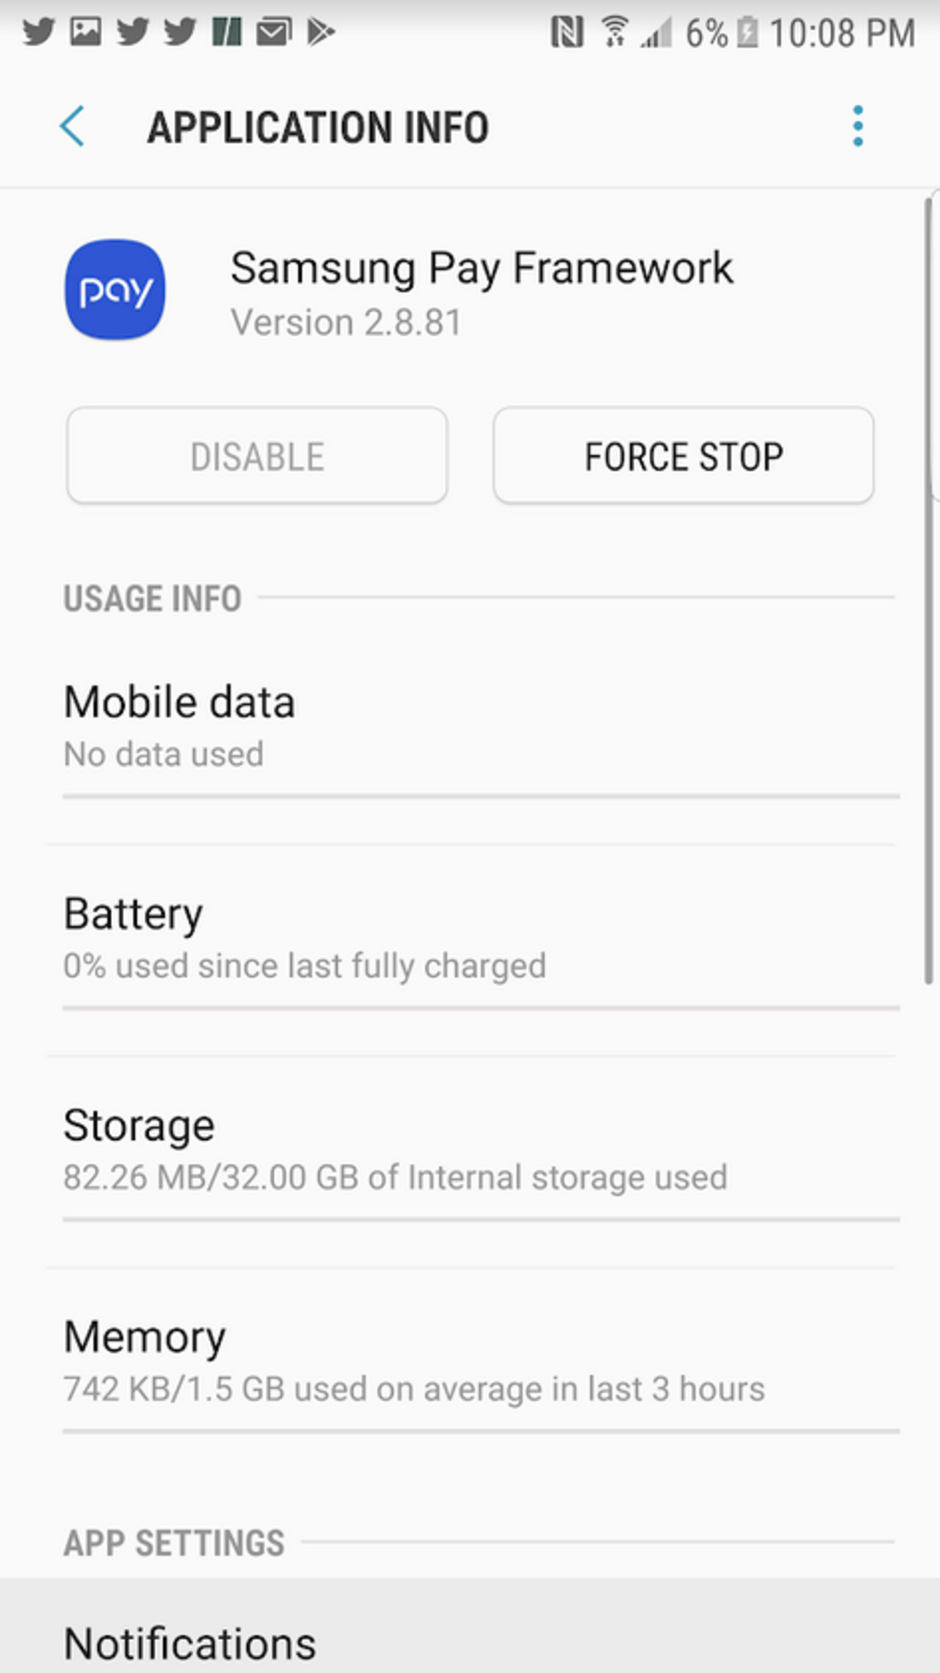 Force closing the Samsung Pay Framework app is the best workaround for this issue to date - Samsung Pay Framework app is devouring battery life on some Galaxy phones